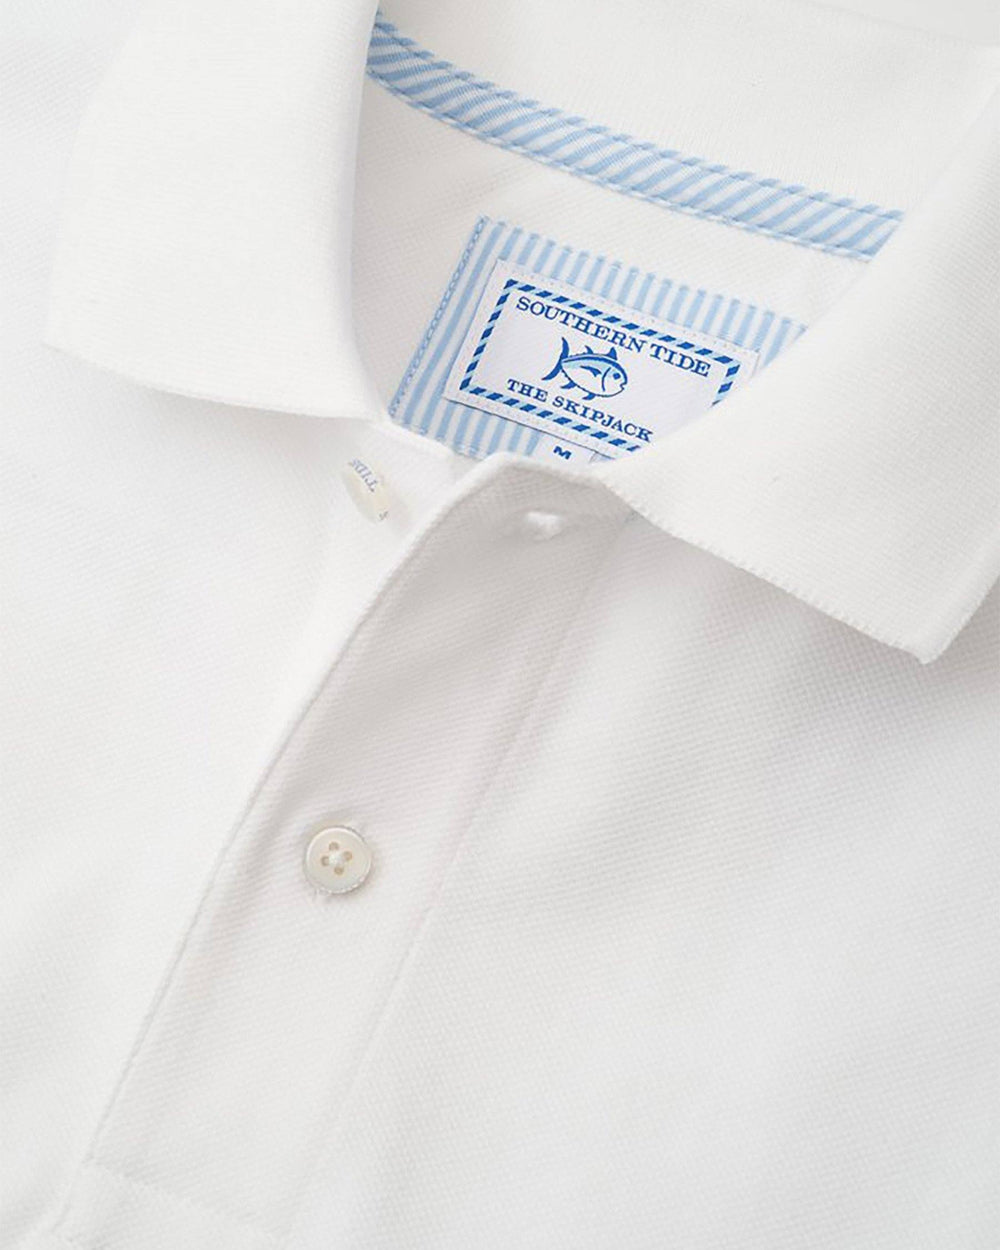 The detail of the Men's White Alabama Crimson Tide Pique Polo Shirt by Southern Tide - Classic White